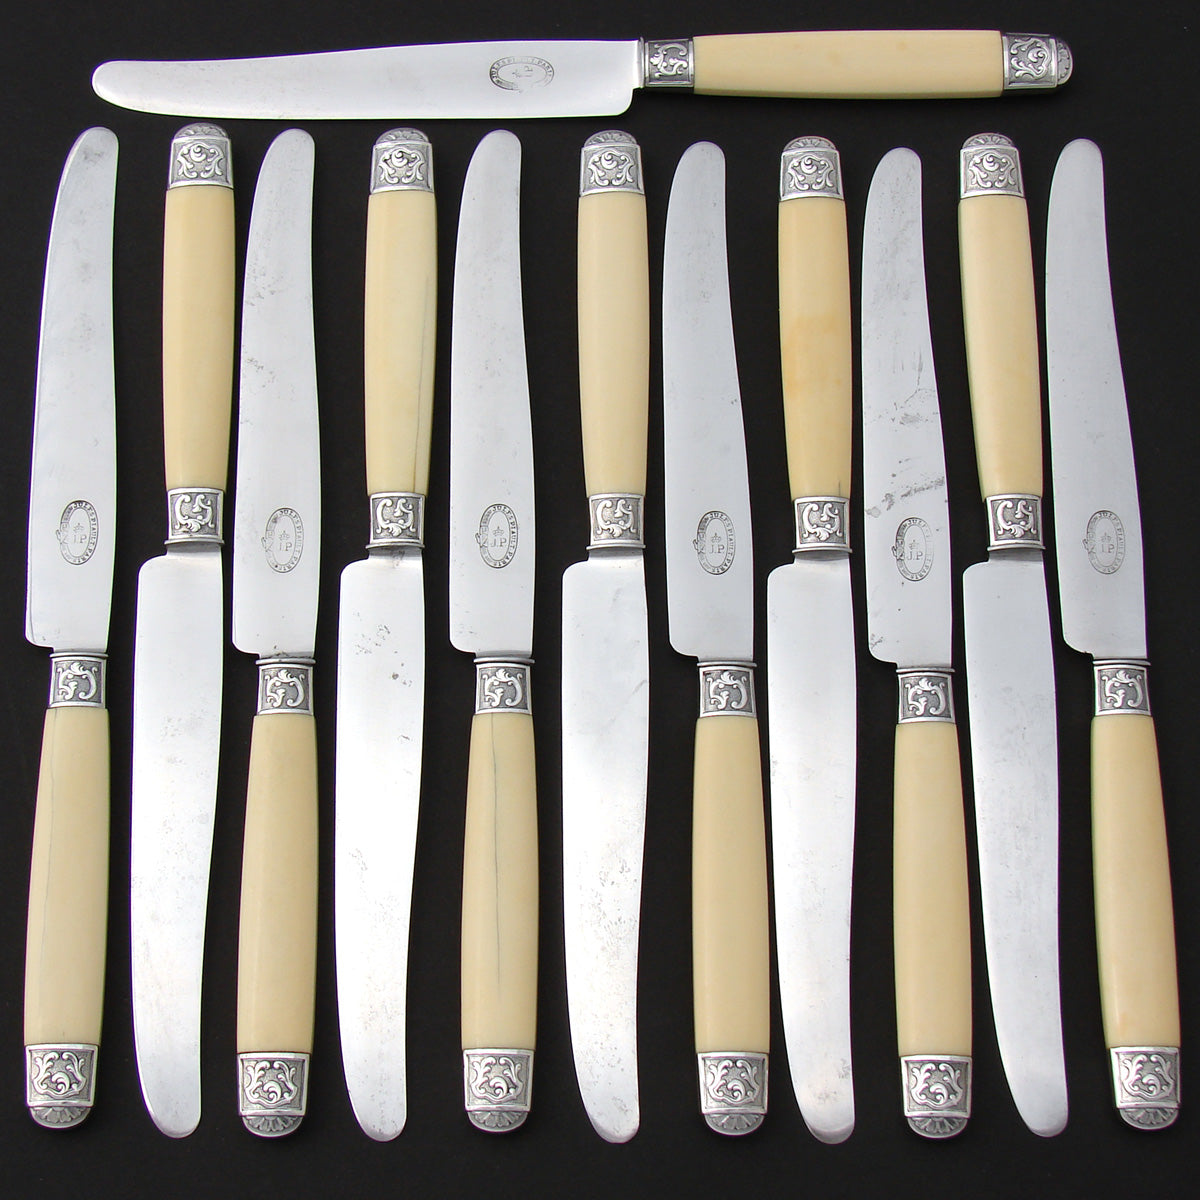 Stunning Antique French 10pc Dinner Knife Set, Silver Inlay on Ivory  Handles, c.1870, Gustave Marmuse